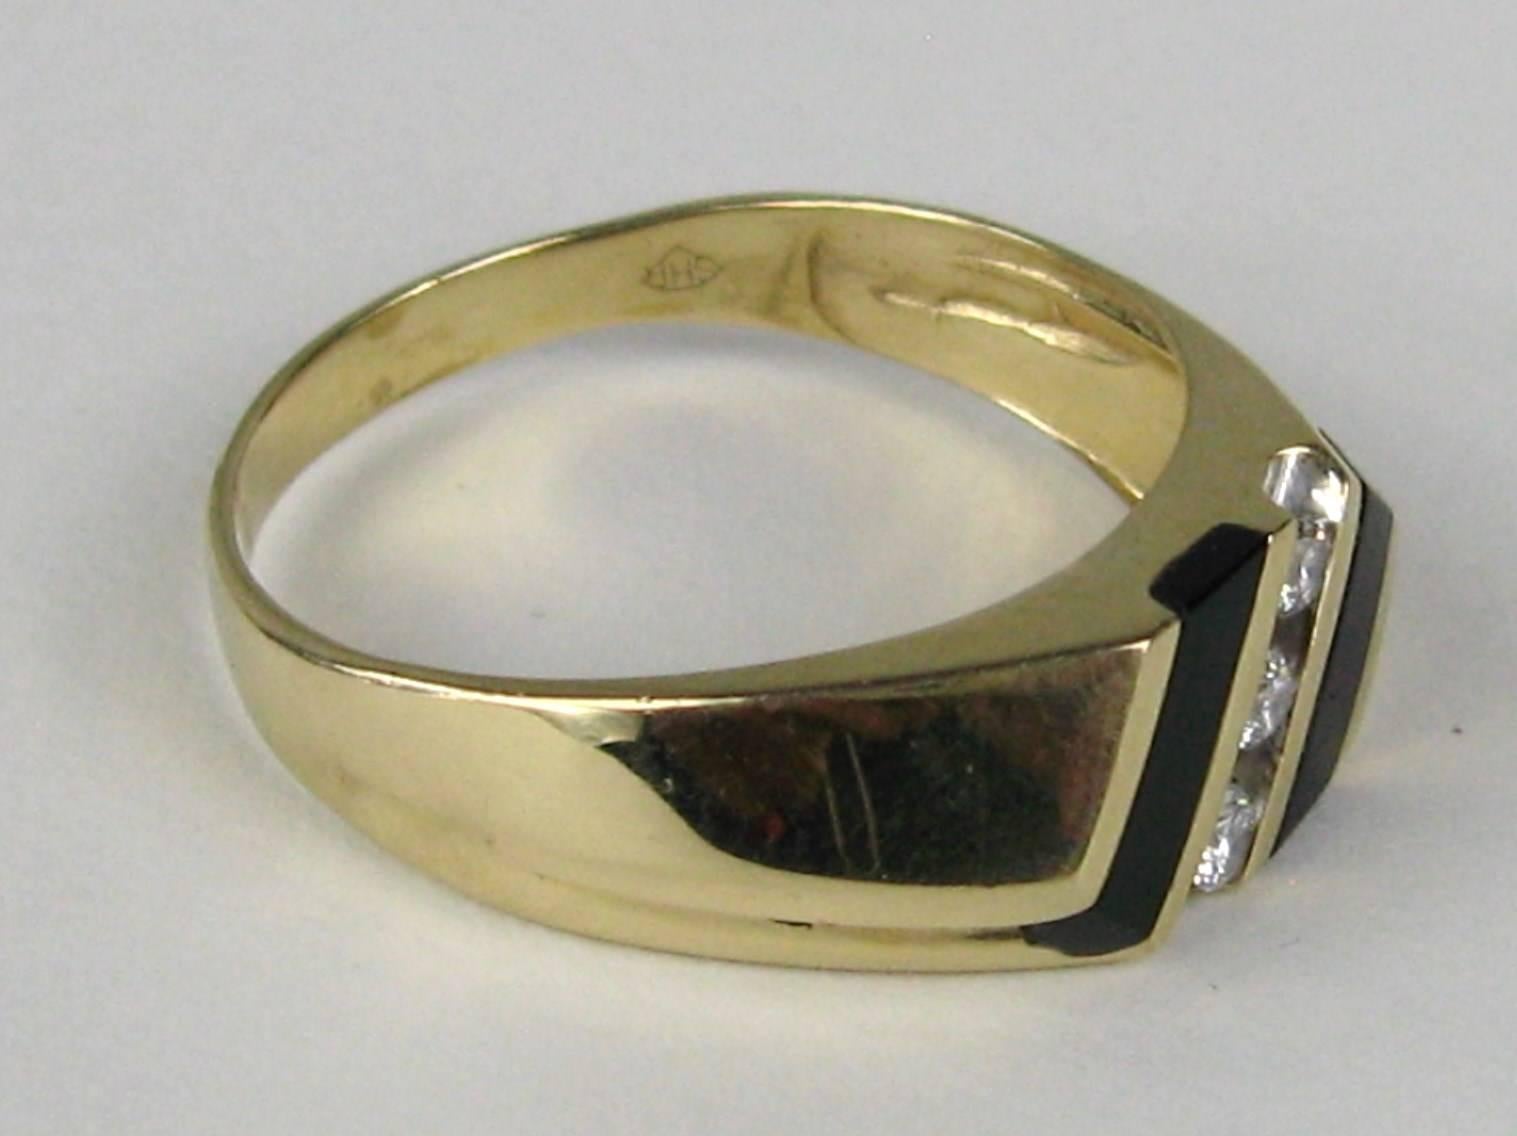 Distinguished Mid Century Men's Ring, channel set diamonds, Onyx inlay measurements are .30 inches wide. Ring is a size 12 and can be sized by us or your jeweler. This is out of our massive collection of Hopi, Zuni, Navajo, Southwestern, sterling